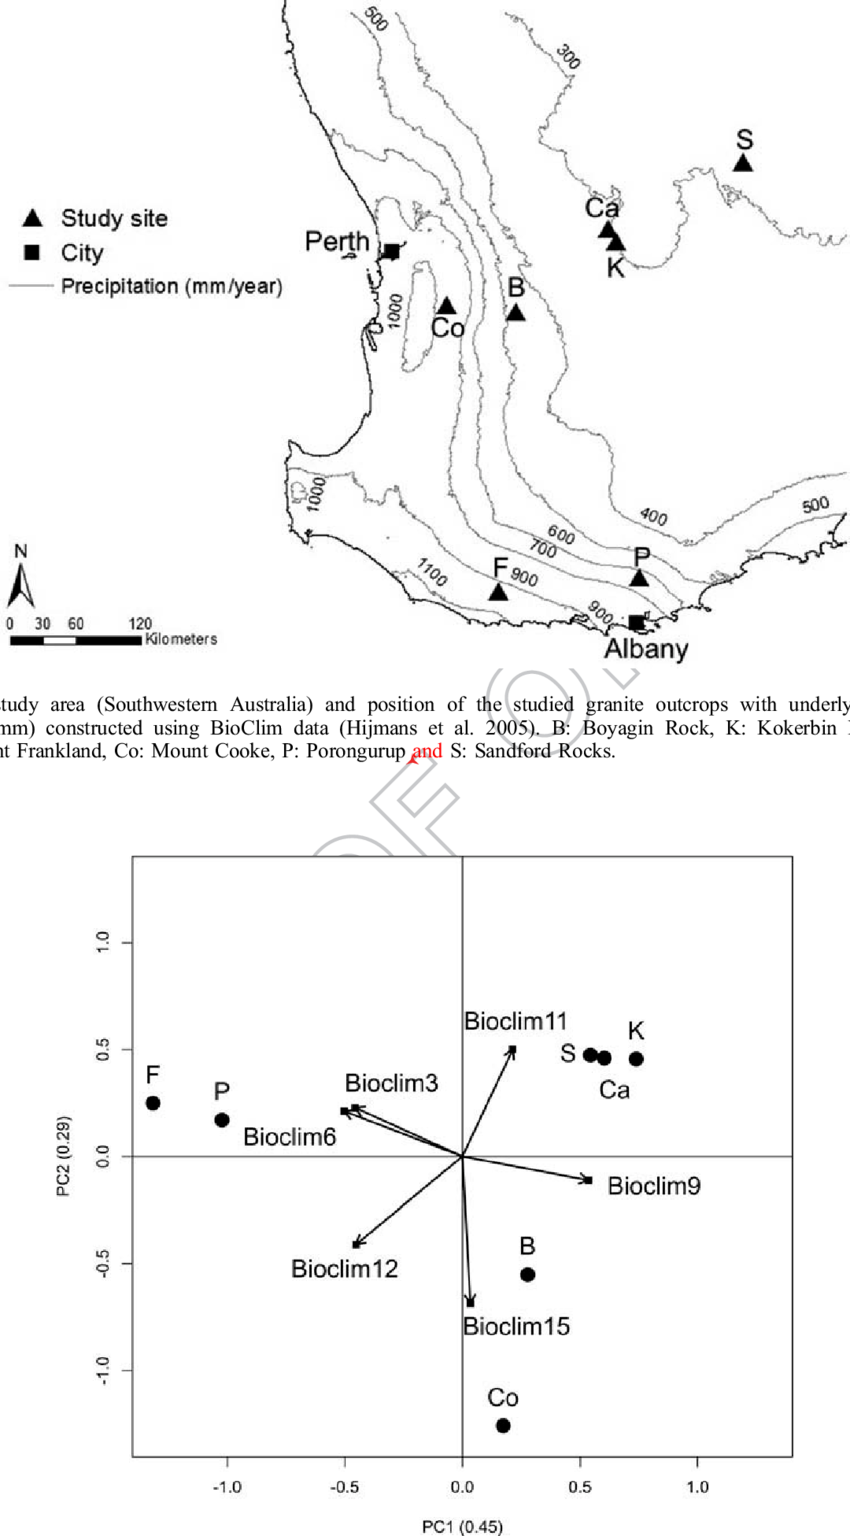 Pca Ordination Space Defined By Axes 1 And 2, Showing - Sandford Rocks Nature Reserve (850x1536), Png Download